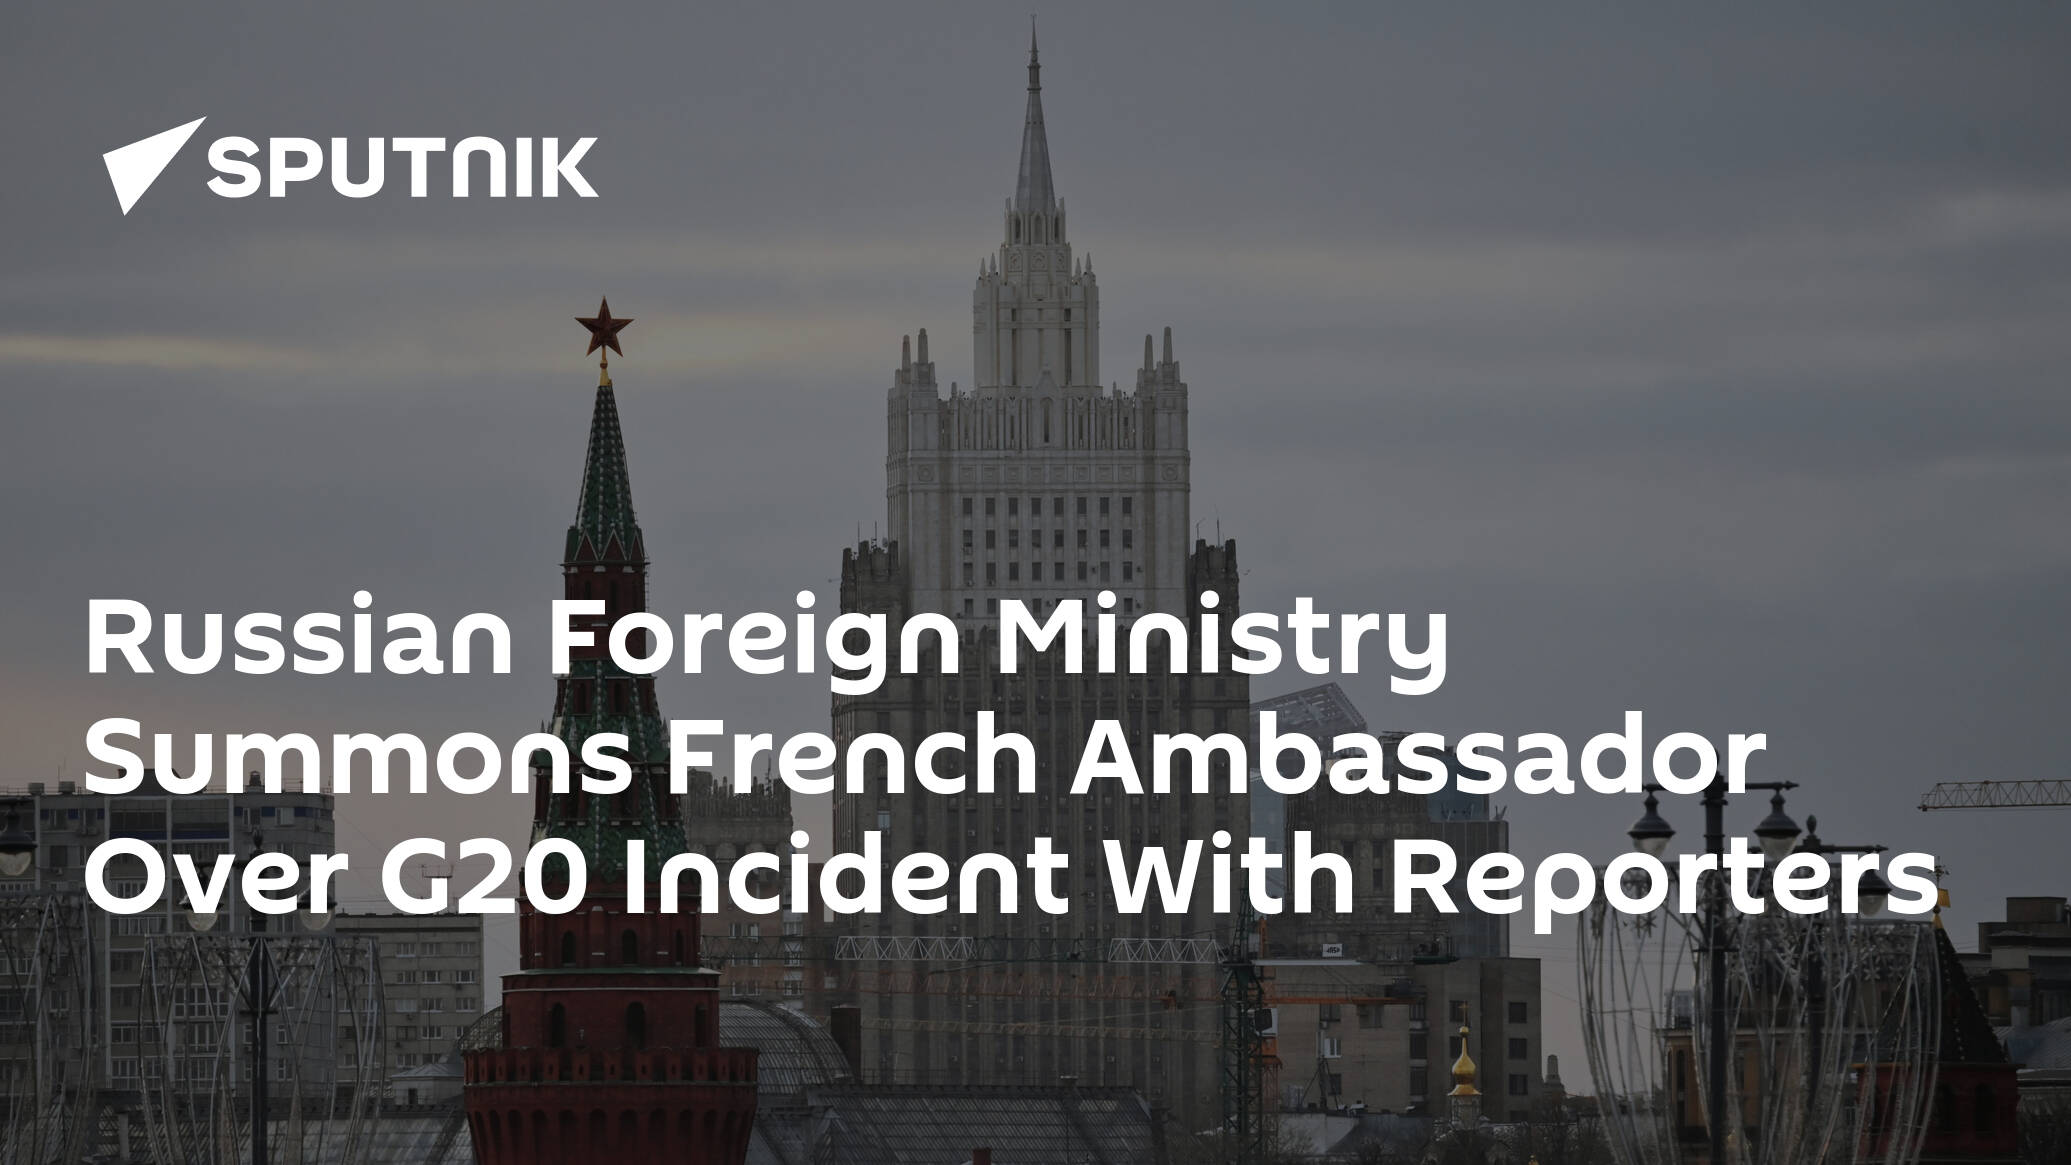 Russian Foreign Ministry Summons French Ambassador Over G20 Incident With Reporters